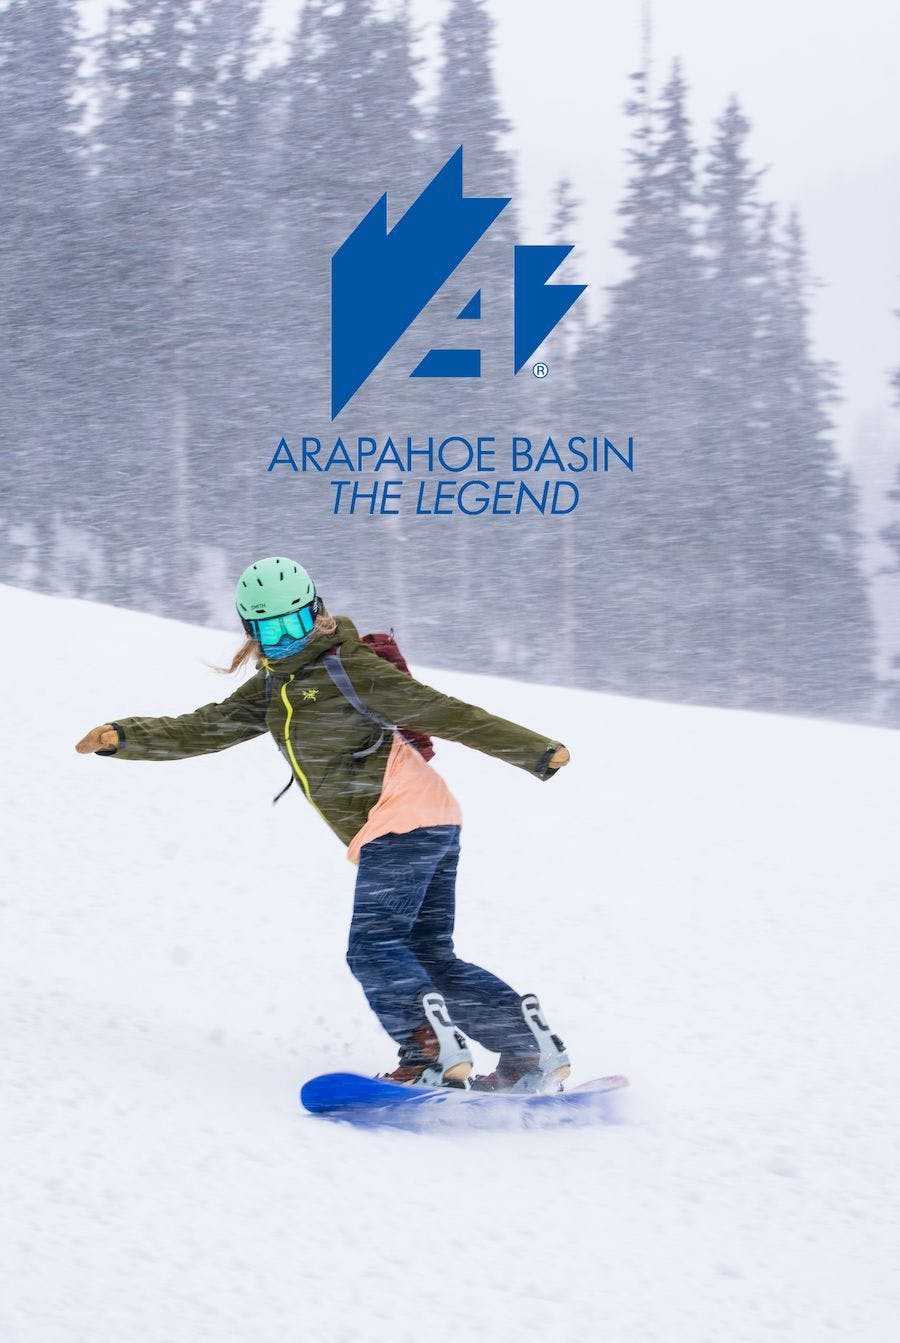 Arapahoe Basin logo with a snowboarder riding on a snowy day